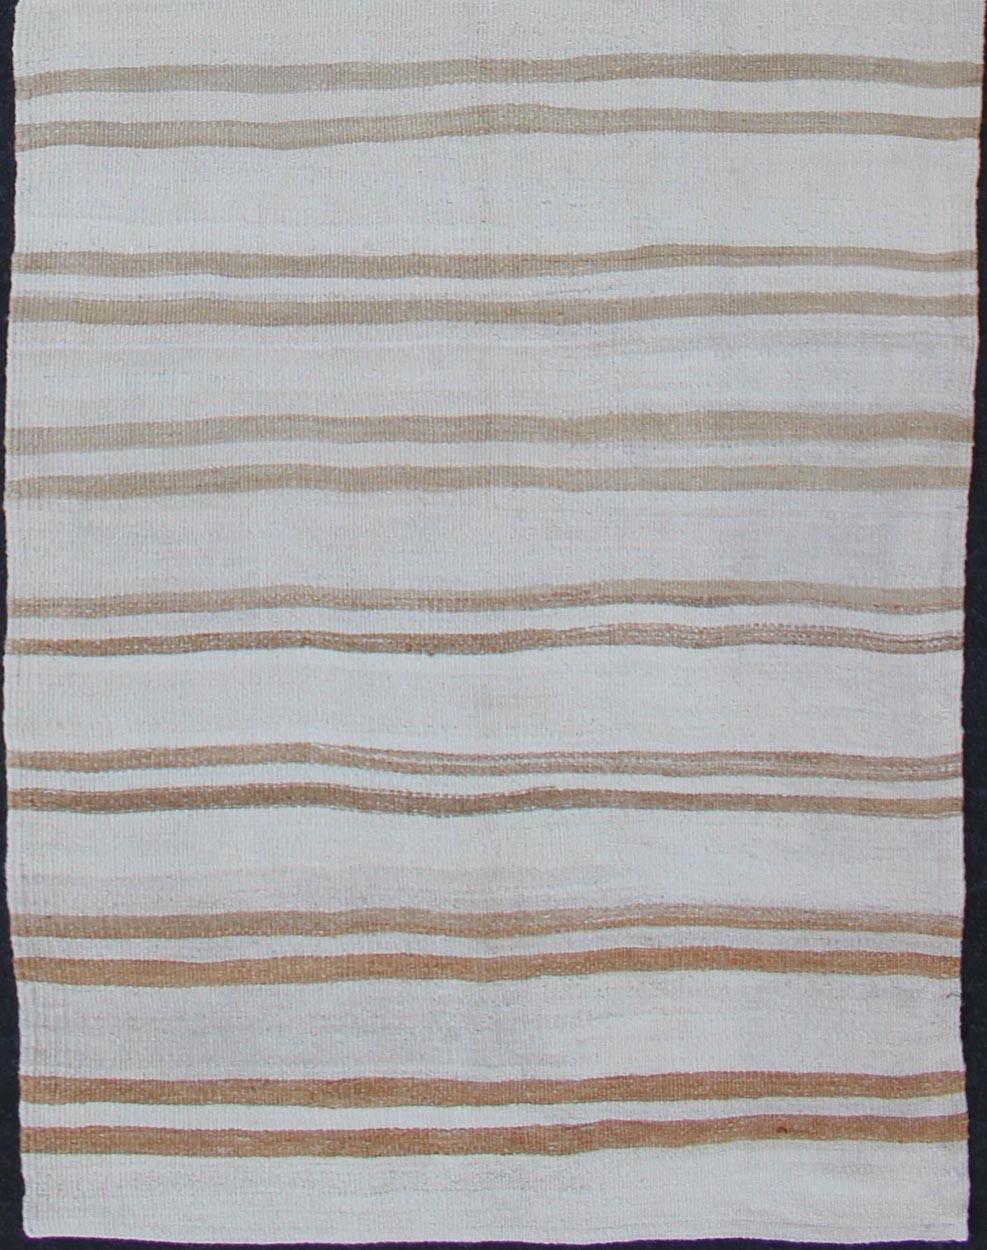 Hand-Woven Vintage Turkish Kilim Runner with Stripe Design in Light Brown and Cream Tones For Sale